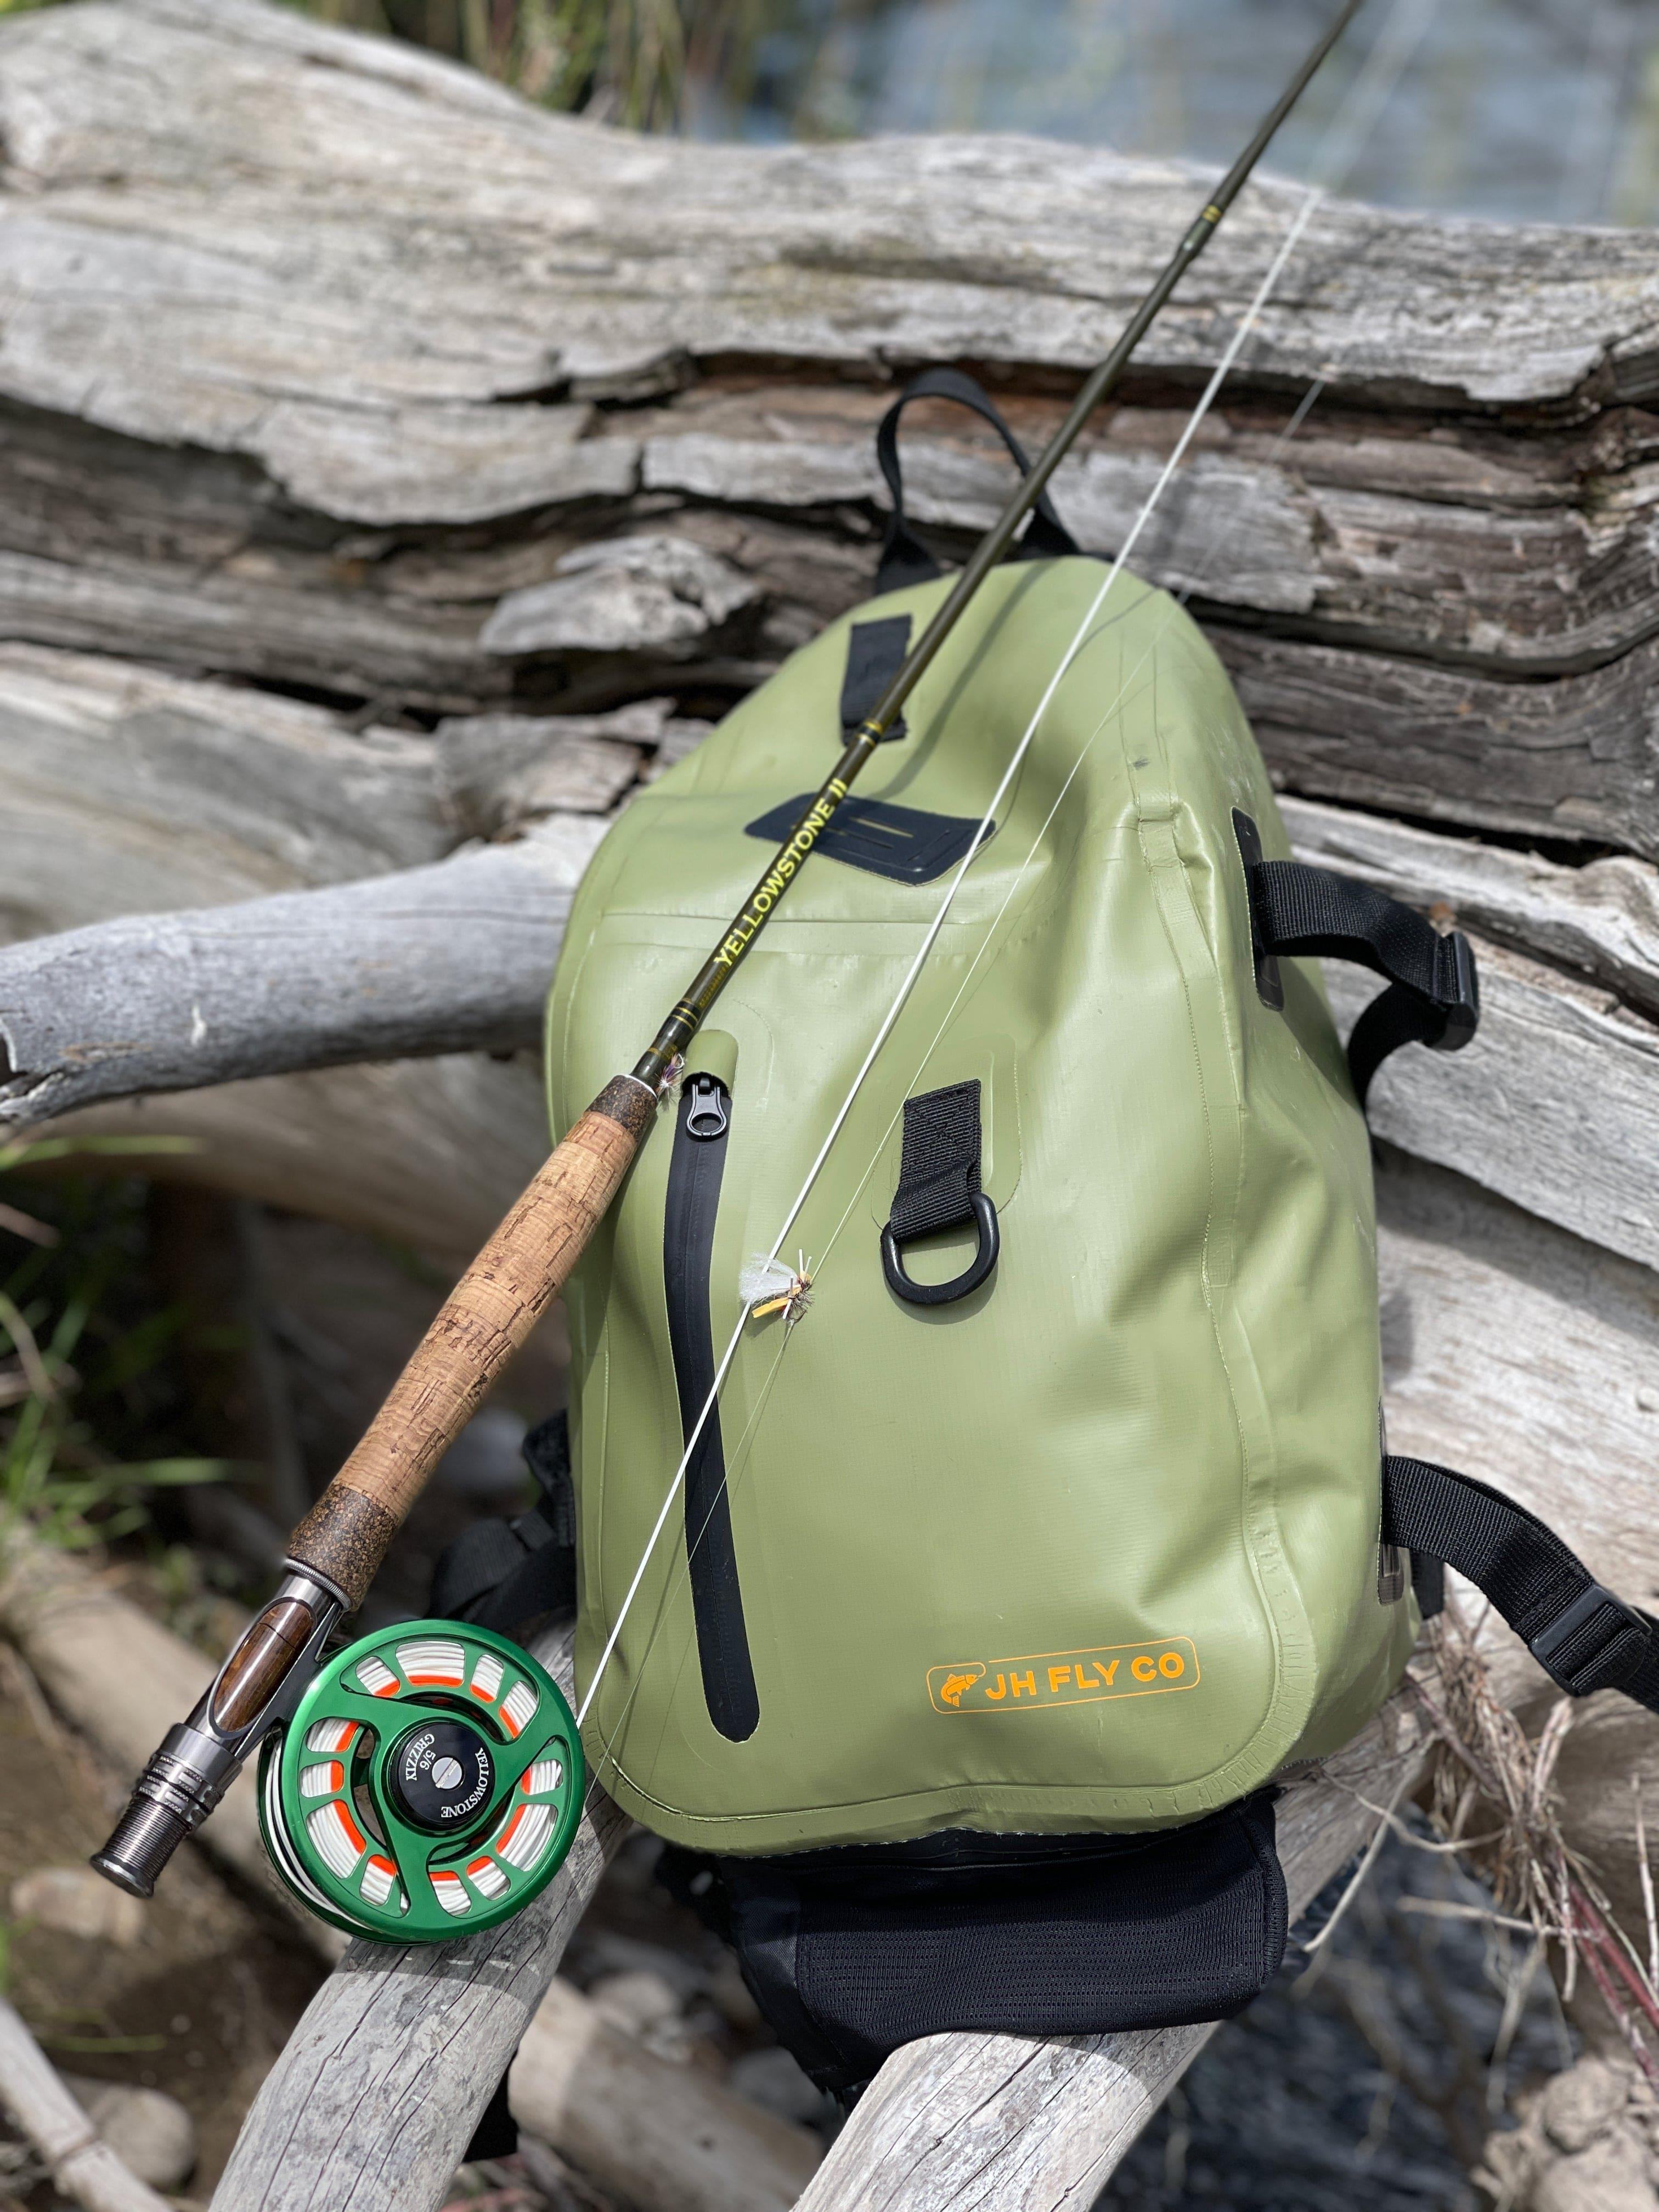 Handy Fishing Reel Holder Bag Protect Your Equipment on Your Fishing Trips